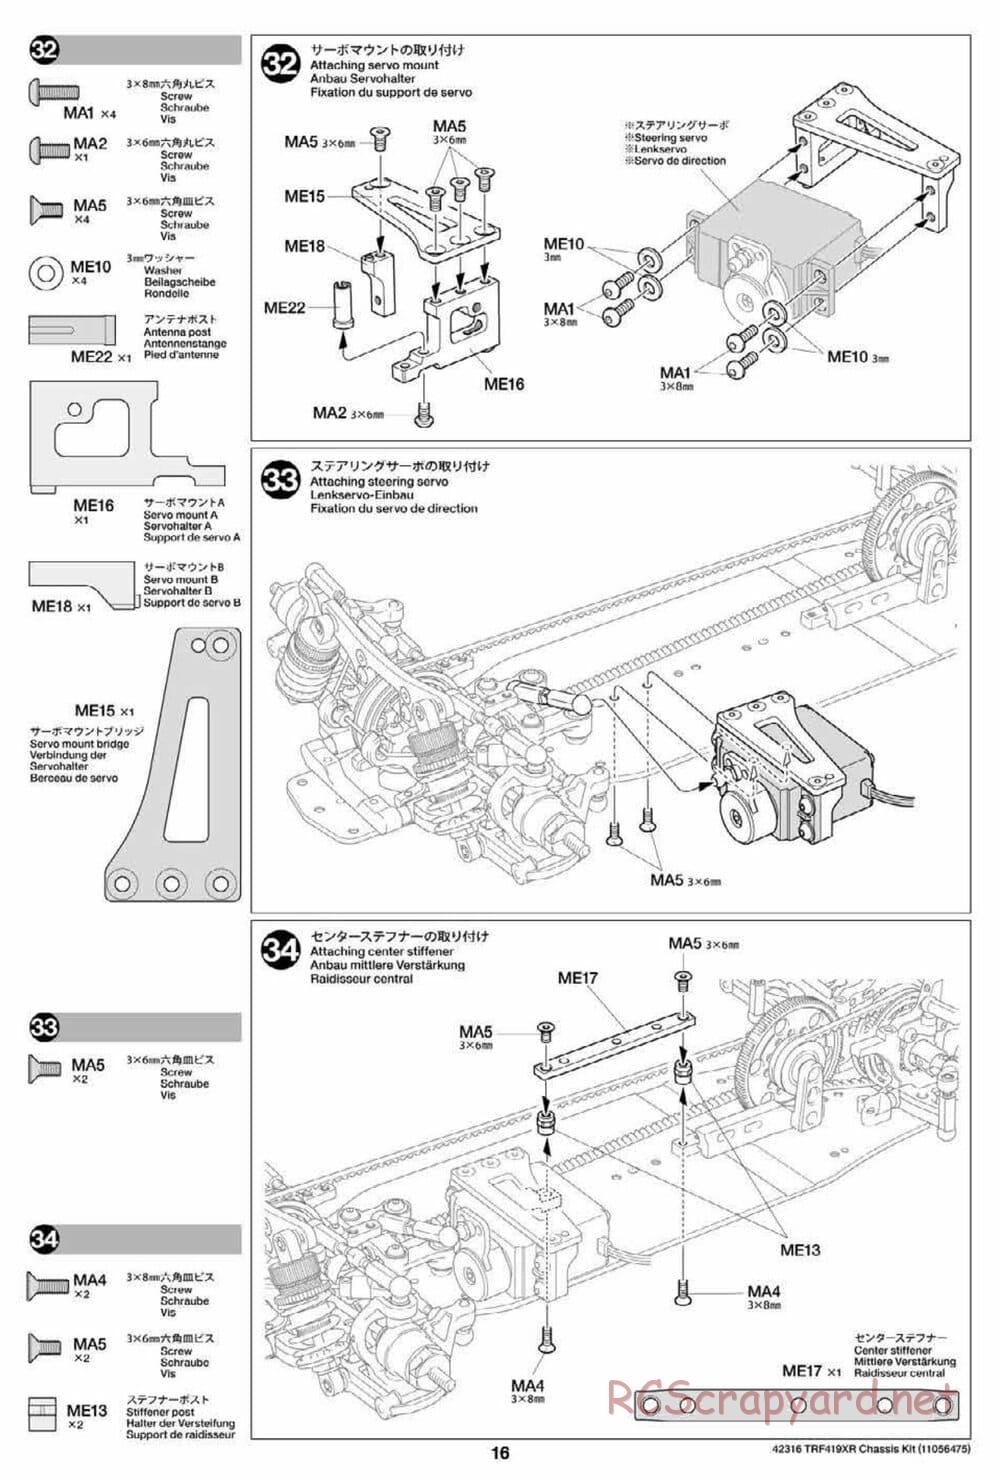 Tamiya - TRF419XR Chassis - Manual - Page 16